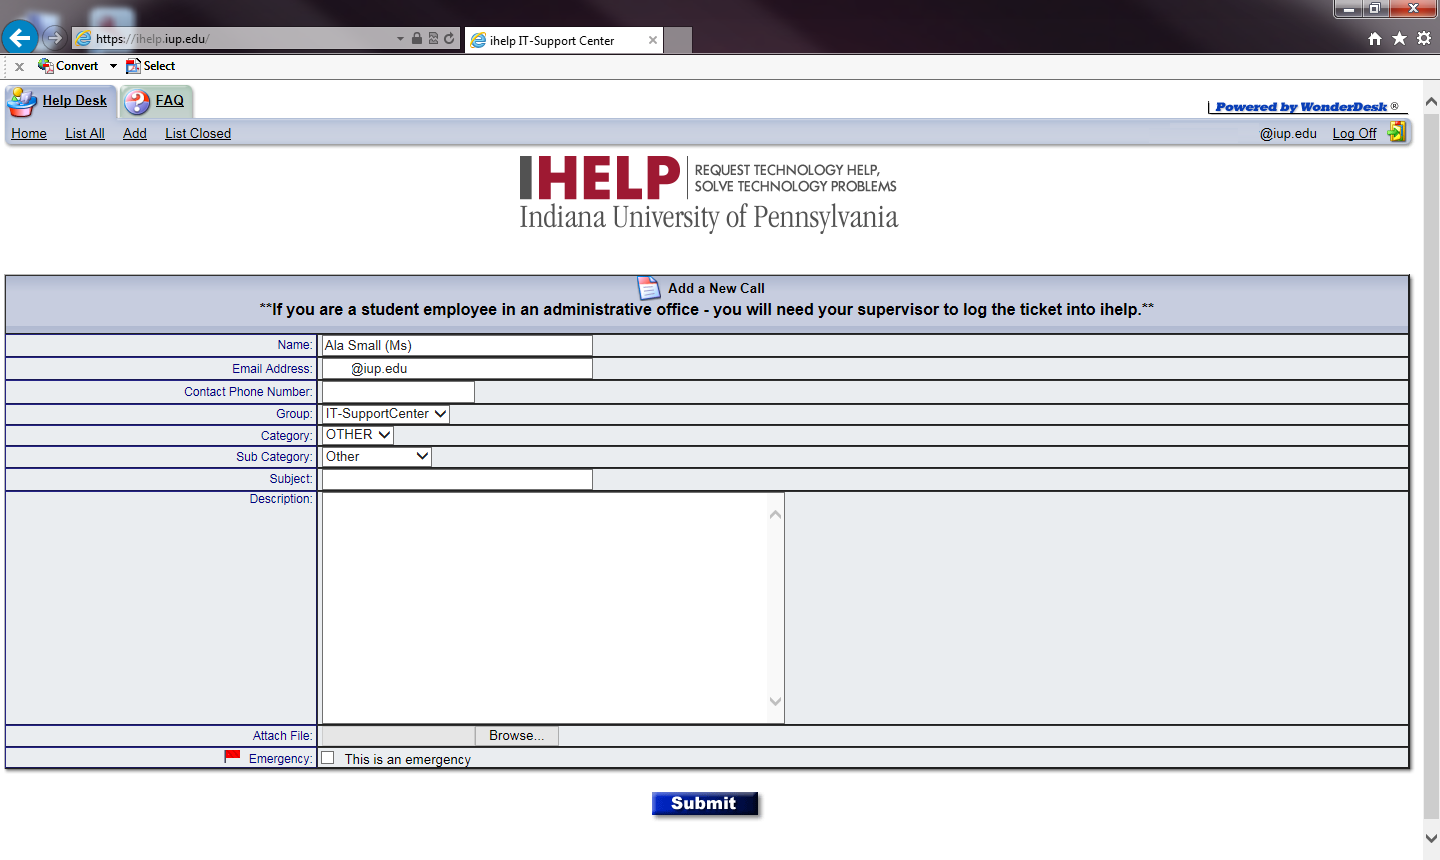 Display if you have no tickets in the ihelp system